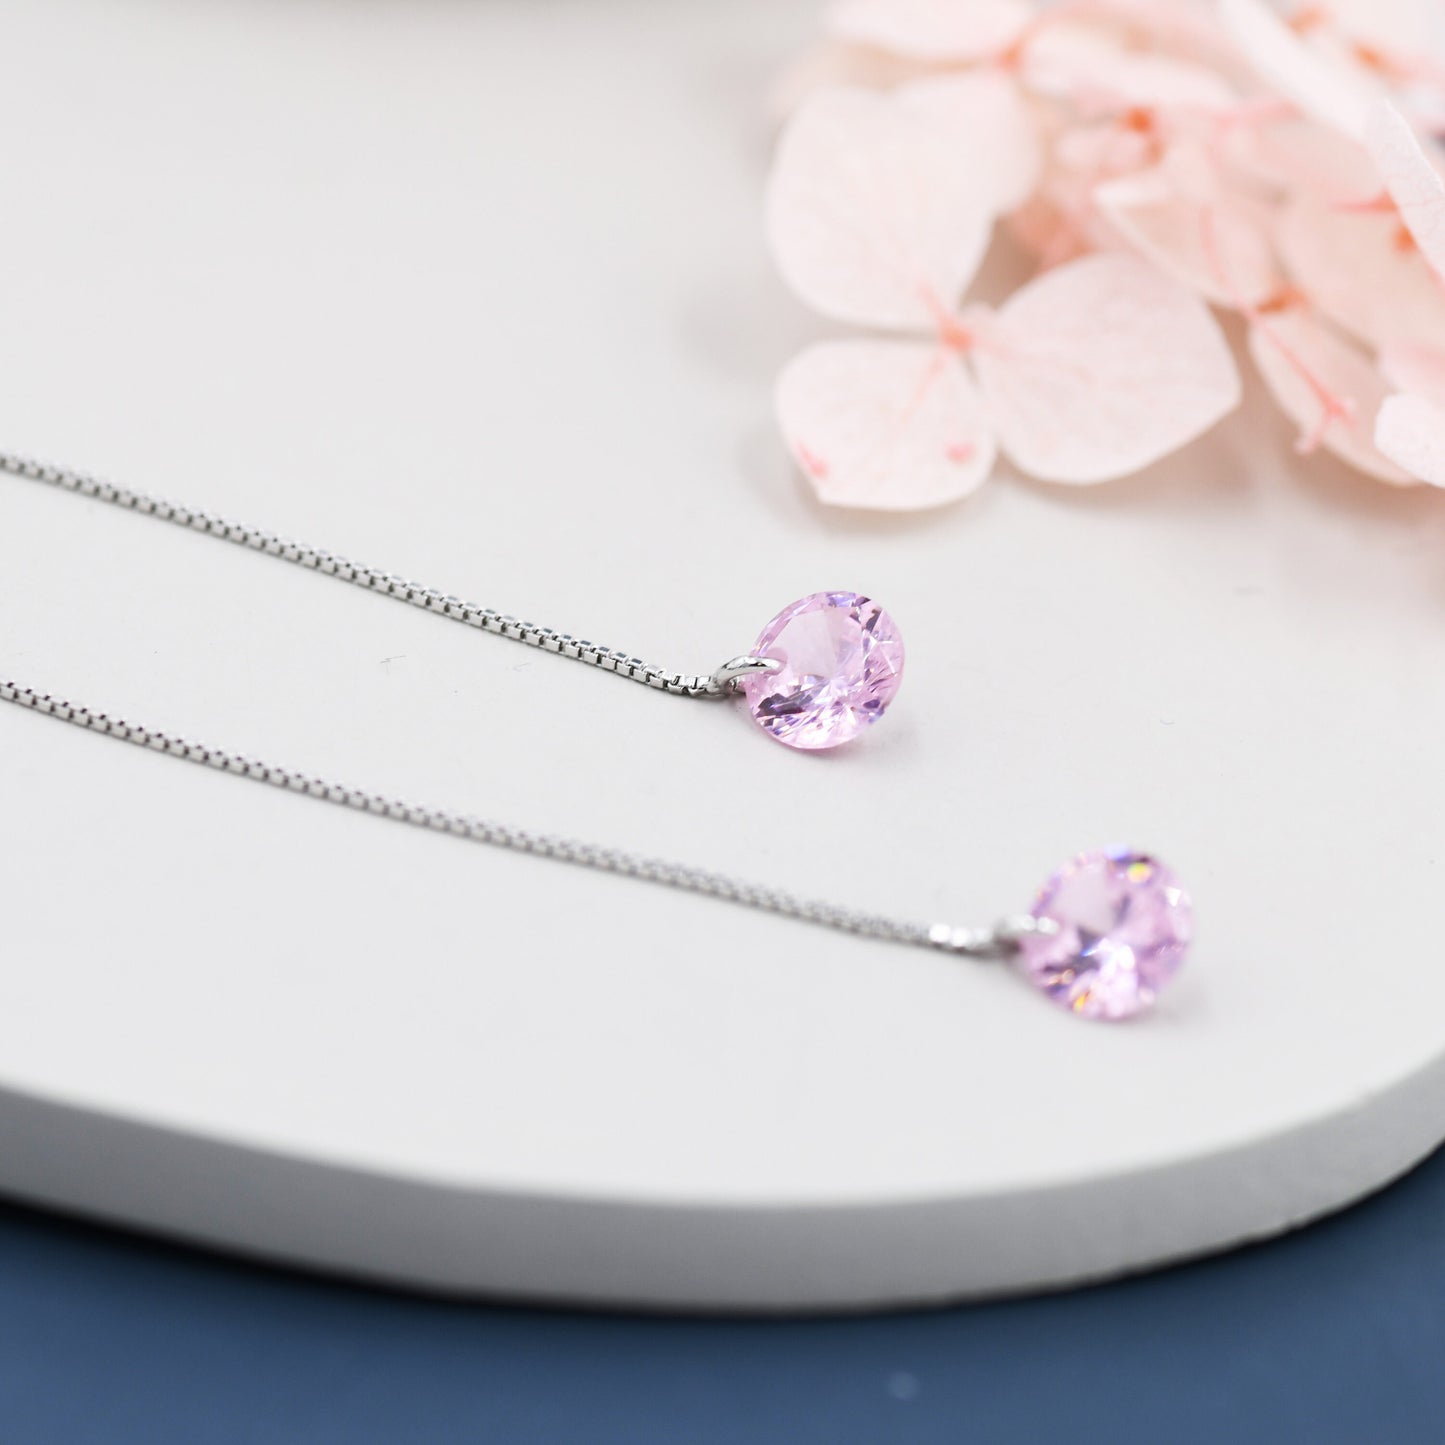 Alexandrite Pink CZ Dot Threader Earrings in Sterling Silver, Silver or Gold, Minimalist Ear Threaders, October Birthstone